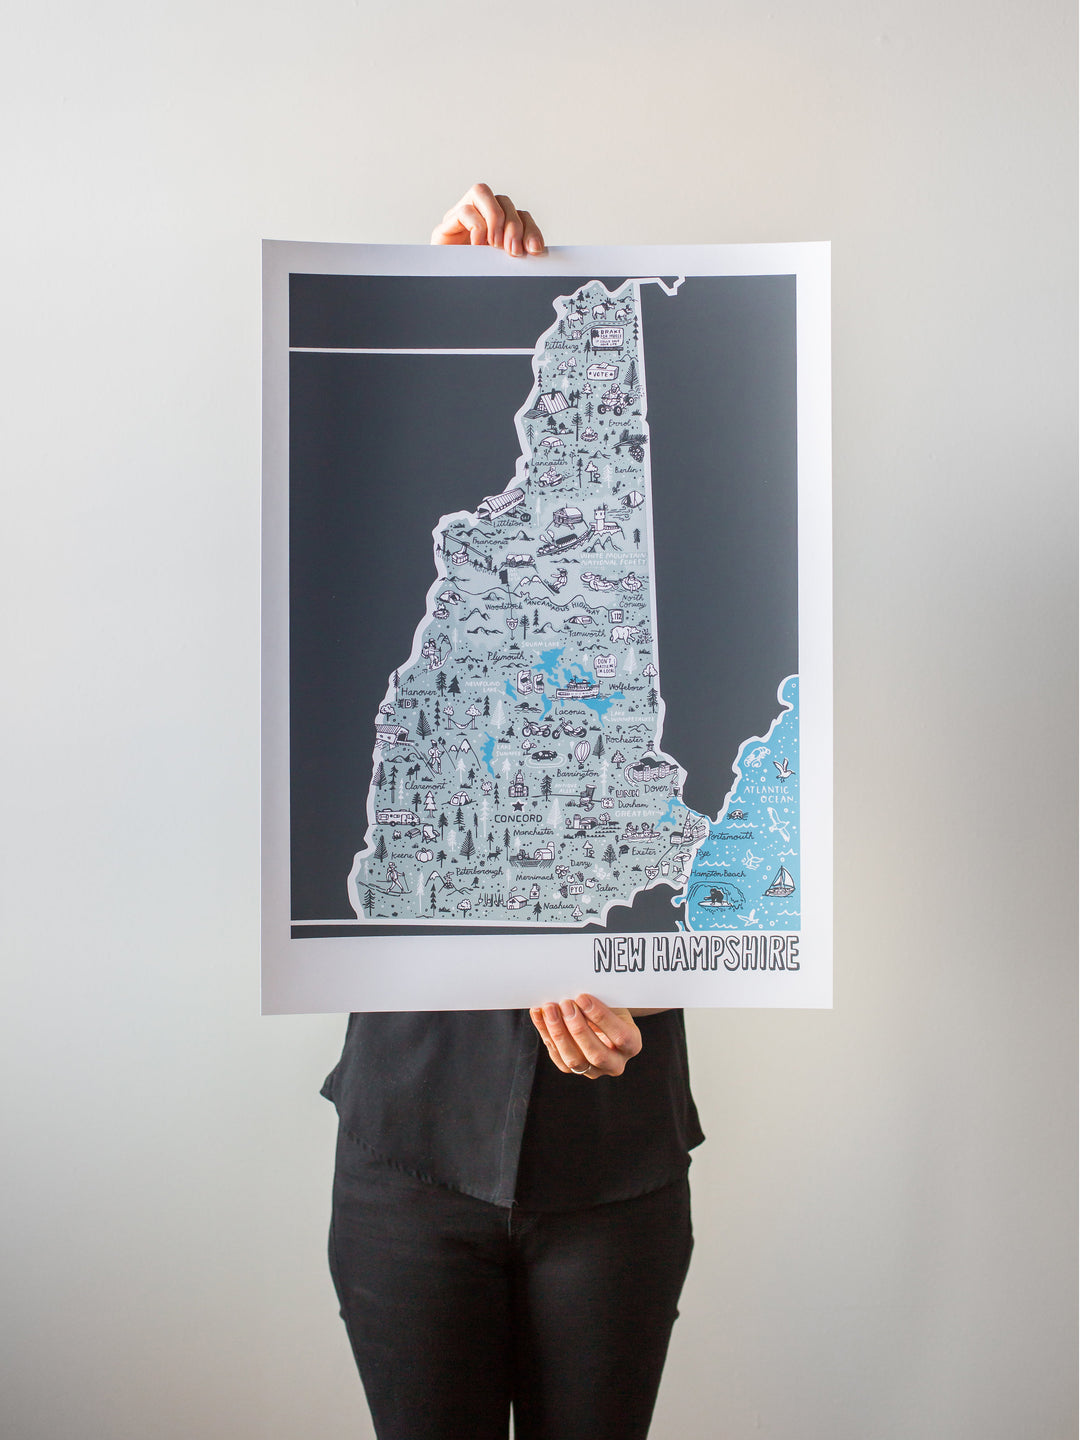 New Hampshire Print by Brainstorm - Visit Dover, White Mountain National Forest, Portsmouth, Lake Winnepesaukee, Keene, North Conway, Littleton, Tamworth, Waterville Valley, Mount Washington